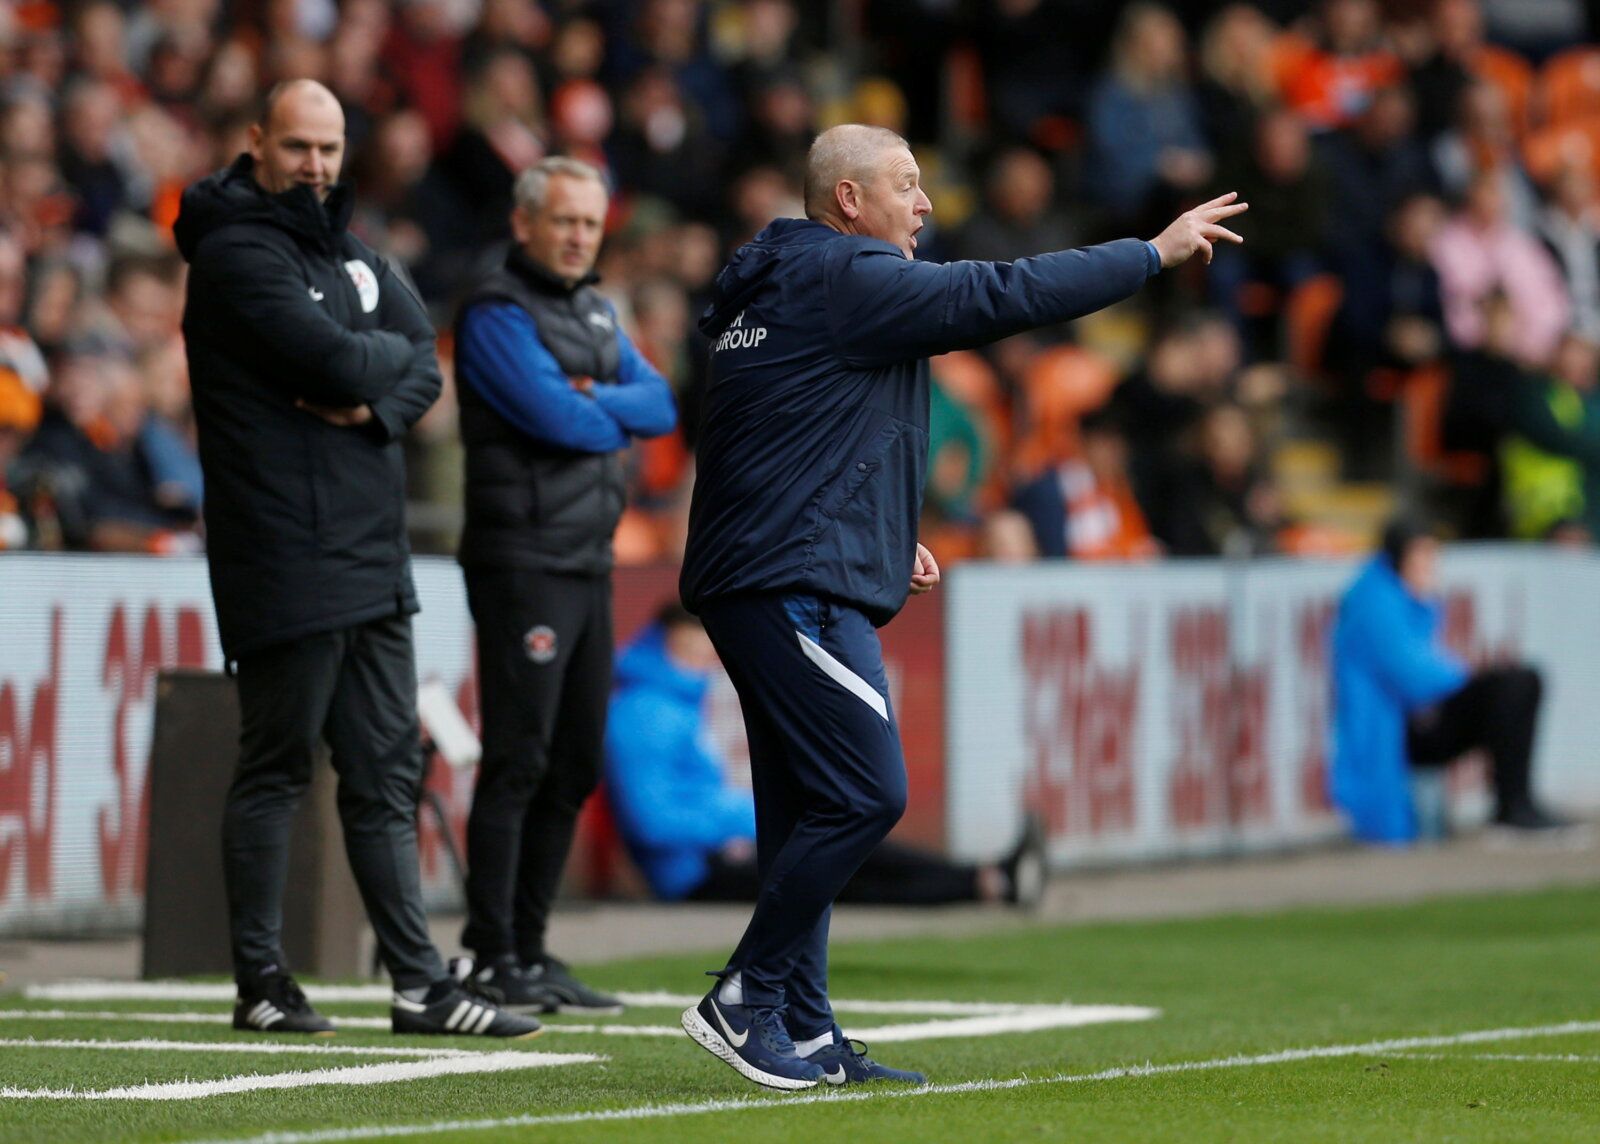 Soccer Football - Championship - Blackpool v Preston North End - Bloomfield Road, Blackpool, Britain - October 23, 2021 Preston North End manager Frankie McAvoy Action Images/Ed Sykes  EDITORIAL USE ONLY. No use with unauthorized audio, video, data, fixture lists, club/league logos or 